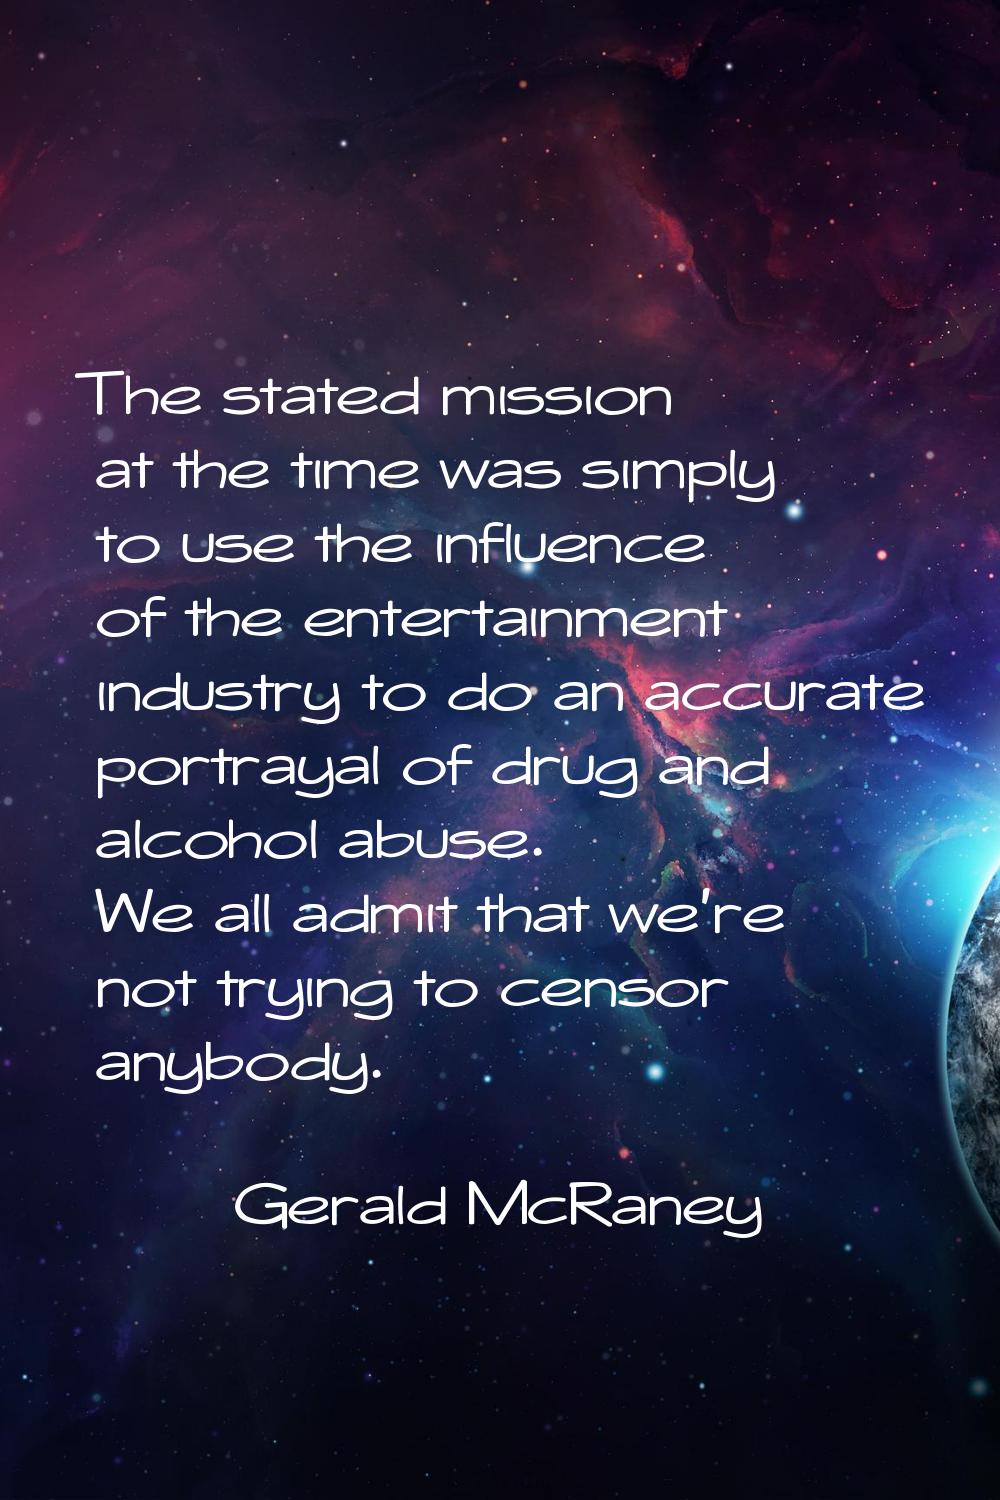 The stated mission at the time was simply to use the influence of the entertainment industry to do 